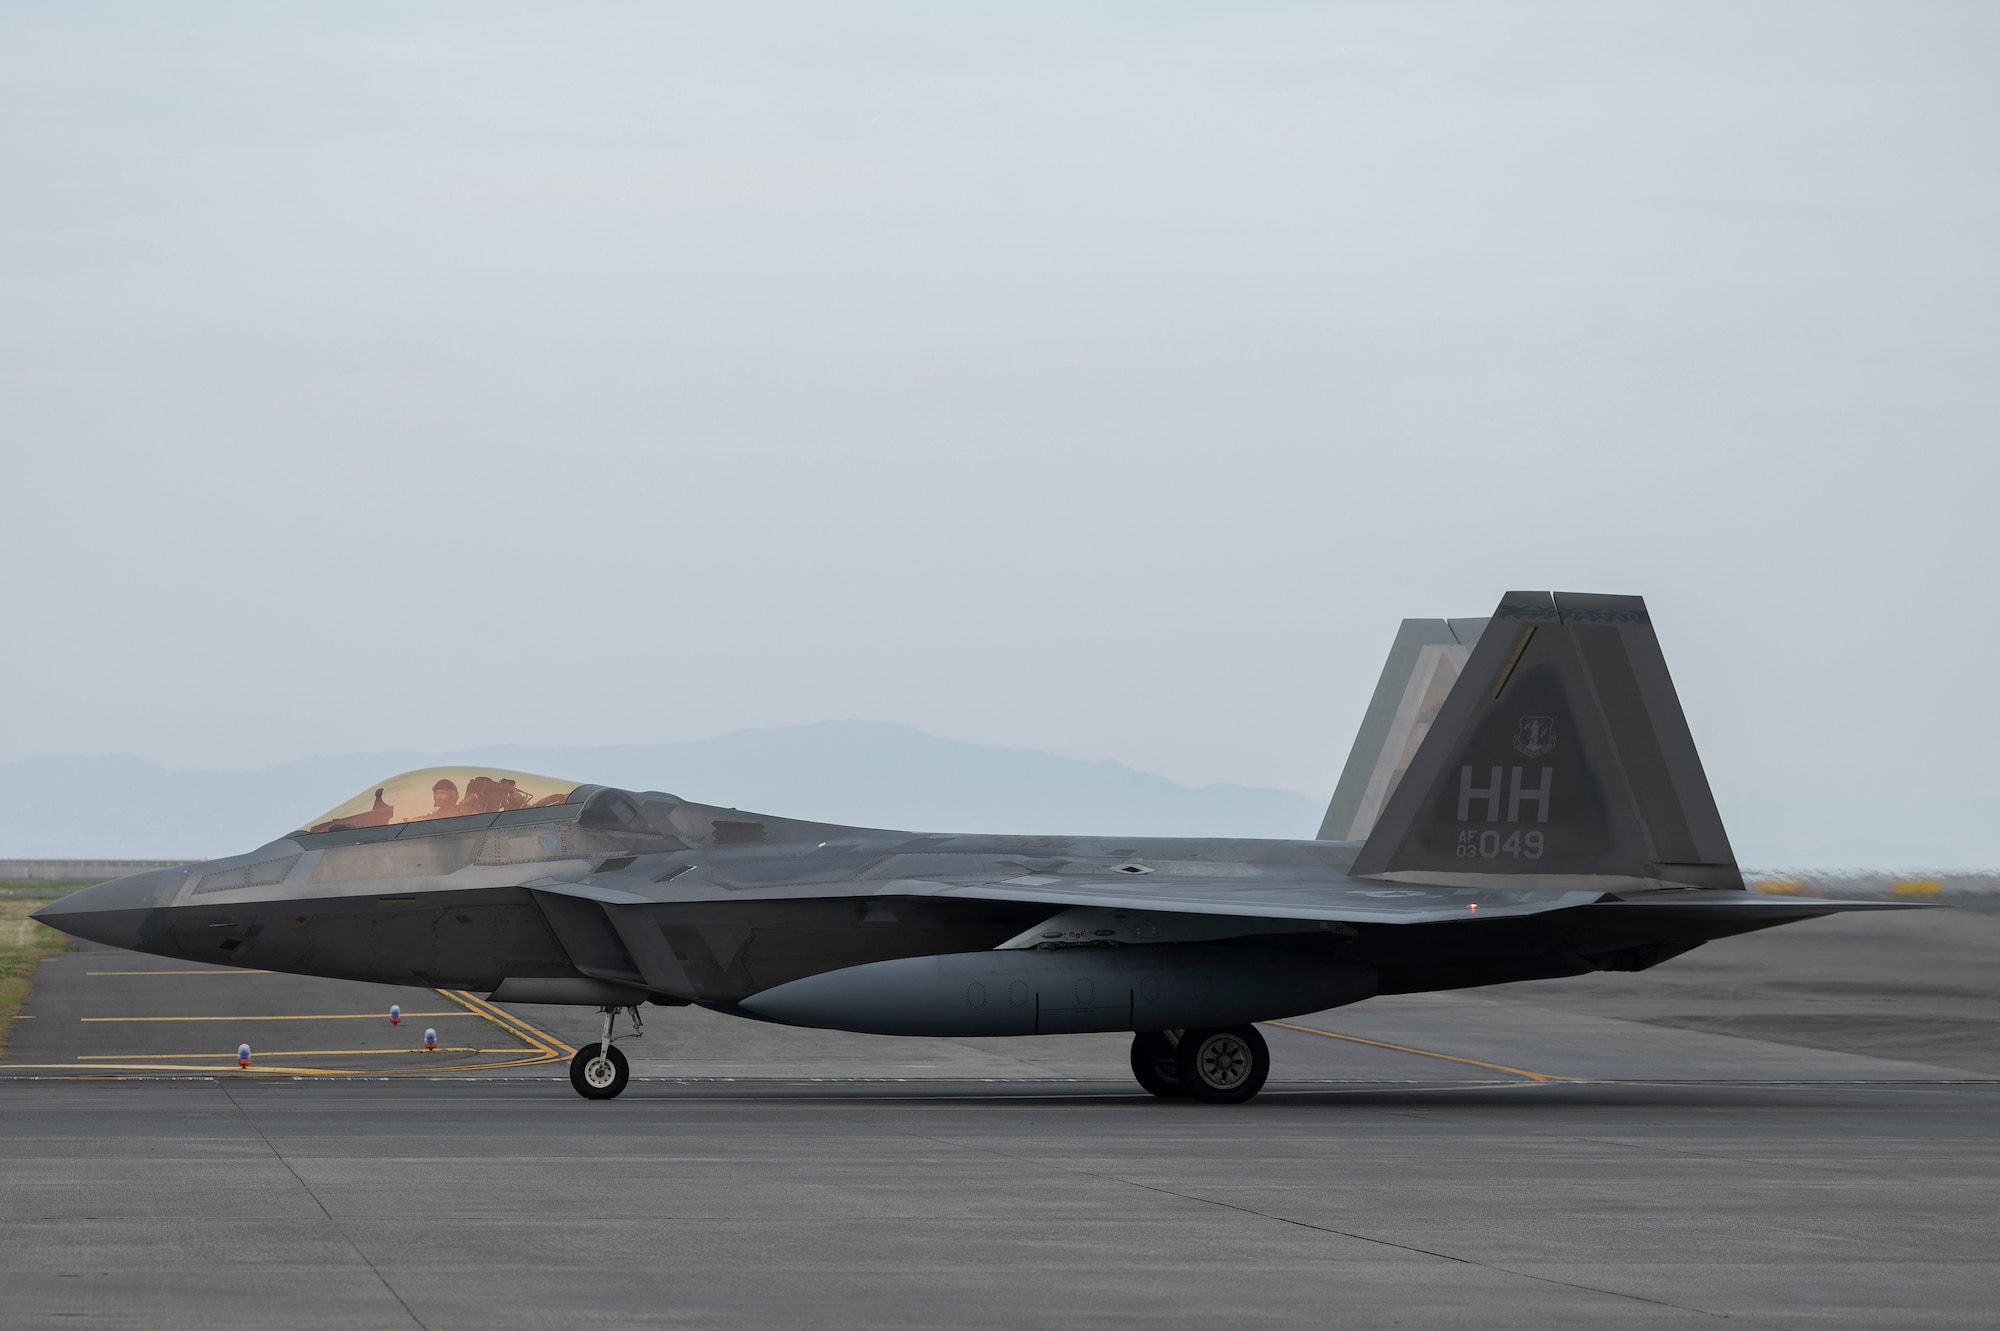 A U.S. Air Force F-22 Raptor assigned to the 199th Expeditionary Fighter Squadron taxis on the runway upon arrival to an agile combat employment training event at Marine Corps Air Station Iwakuni, Japan, June 15, 2022. During the ACE training event, the 199th EFS is assigned to the 354th Air Expeditionary Wing and operating with the 356th Expeditionary Fighter Squadron to refine fifth generation integration tactics, techniques and procedures. (U.S. Air Force photo by Staff Sgt. Zade Vadnais)